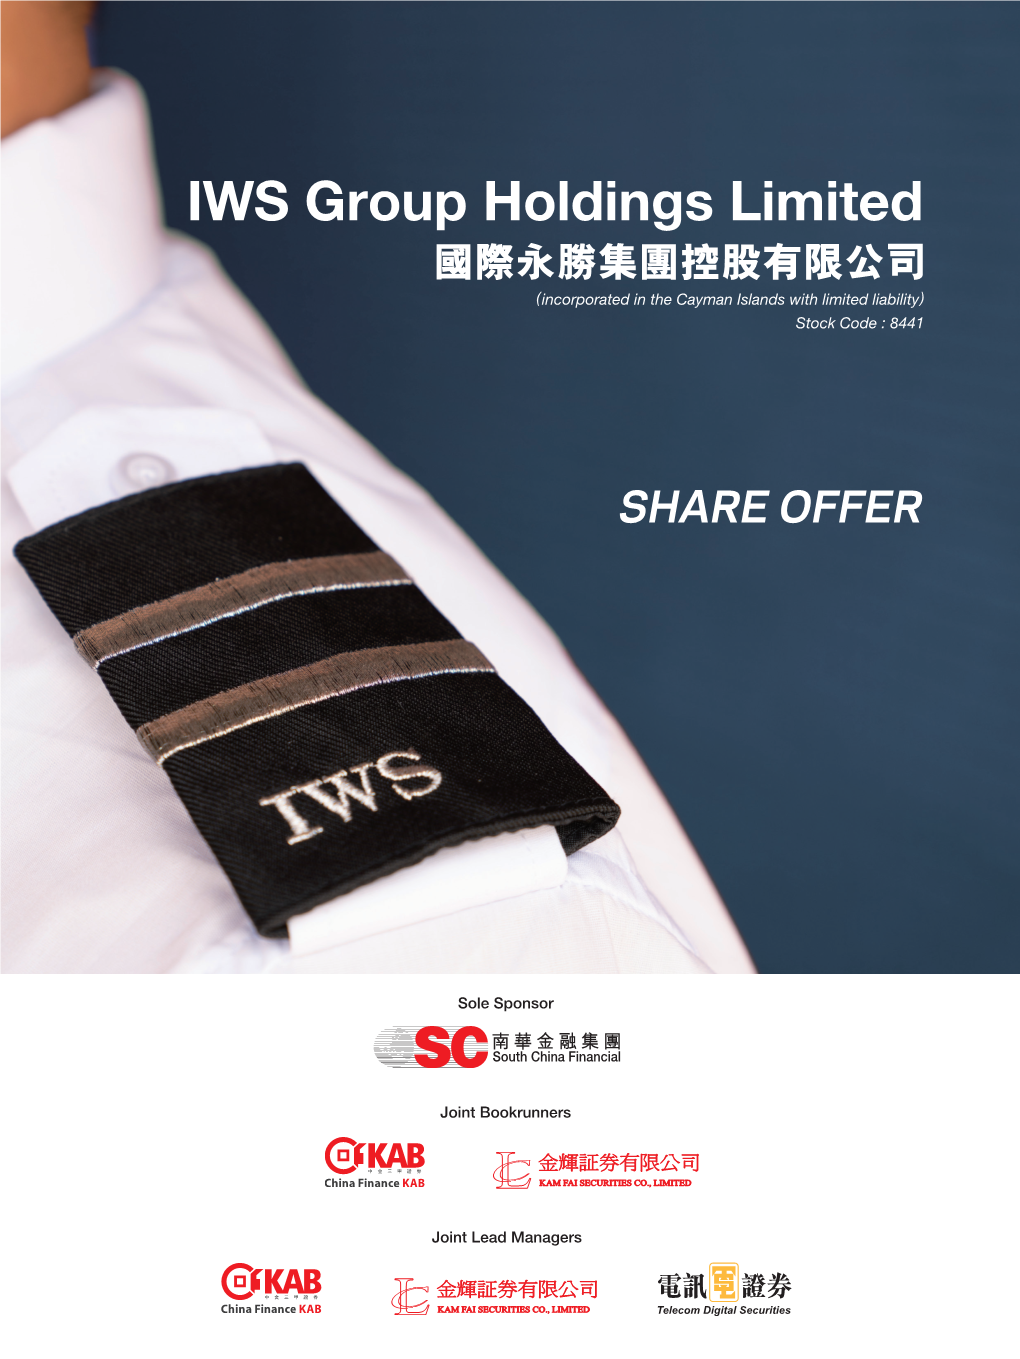 IWS Group Holdings Limited 國際永勝集團控股有限公司 (Incorporated in the Cayman Islands with Limited Liability) Stock Code : 8441